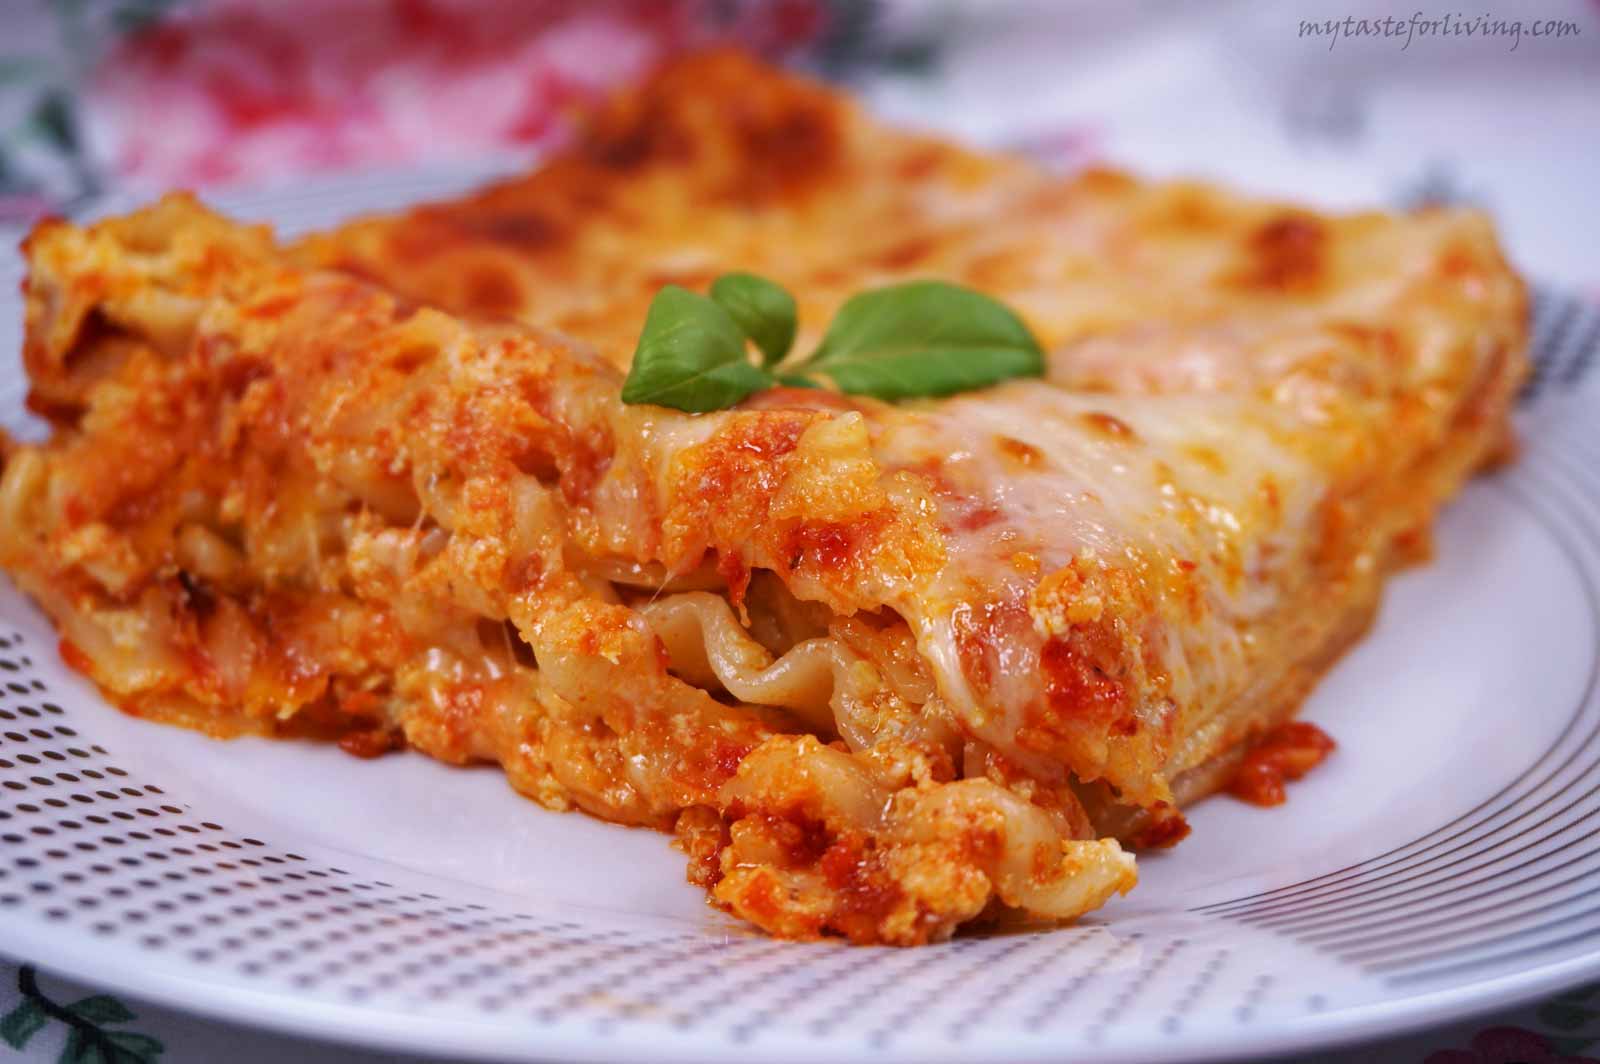 I love lasagna! And by preparing it in this way I managed to impress the children at home! For the preparation of the lasagna I use home made tomato sauce with basil, stewed zucchini, carrots and onions with parmesan and ricotta, lasagna noodles and grated mozzarella or yellow cheese.